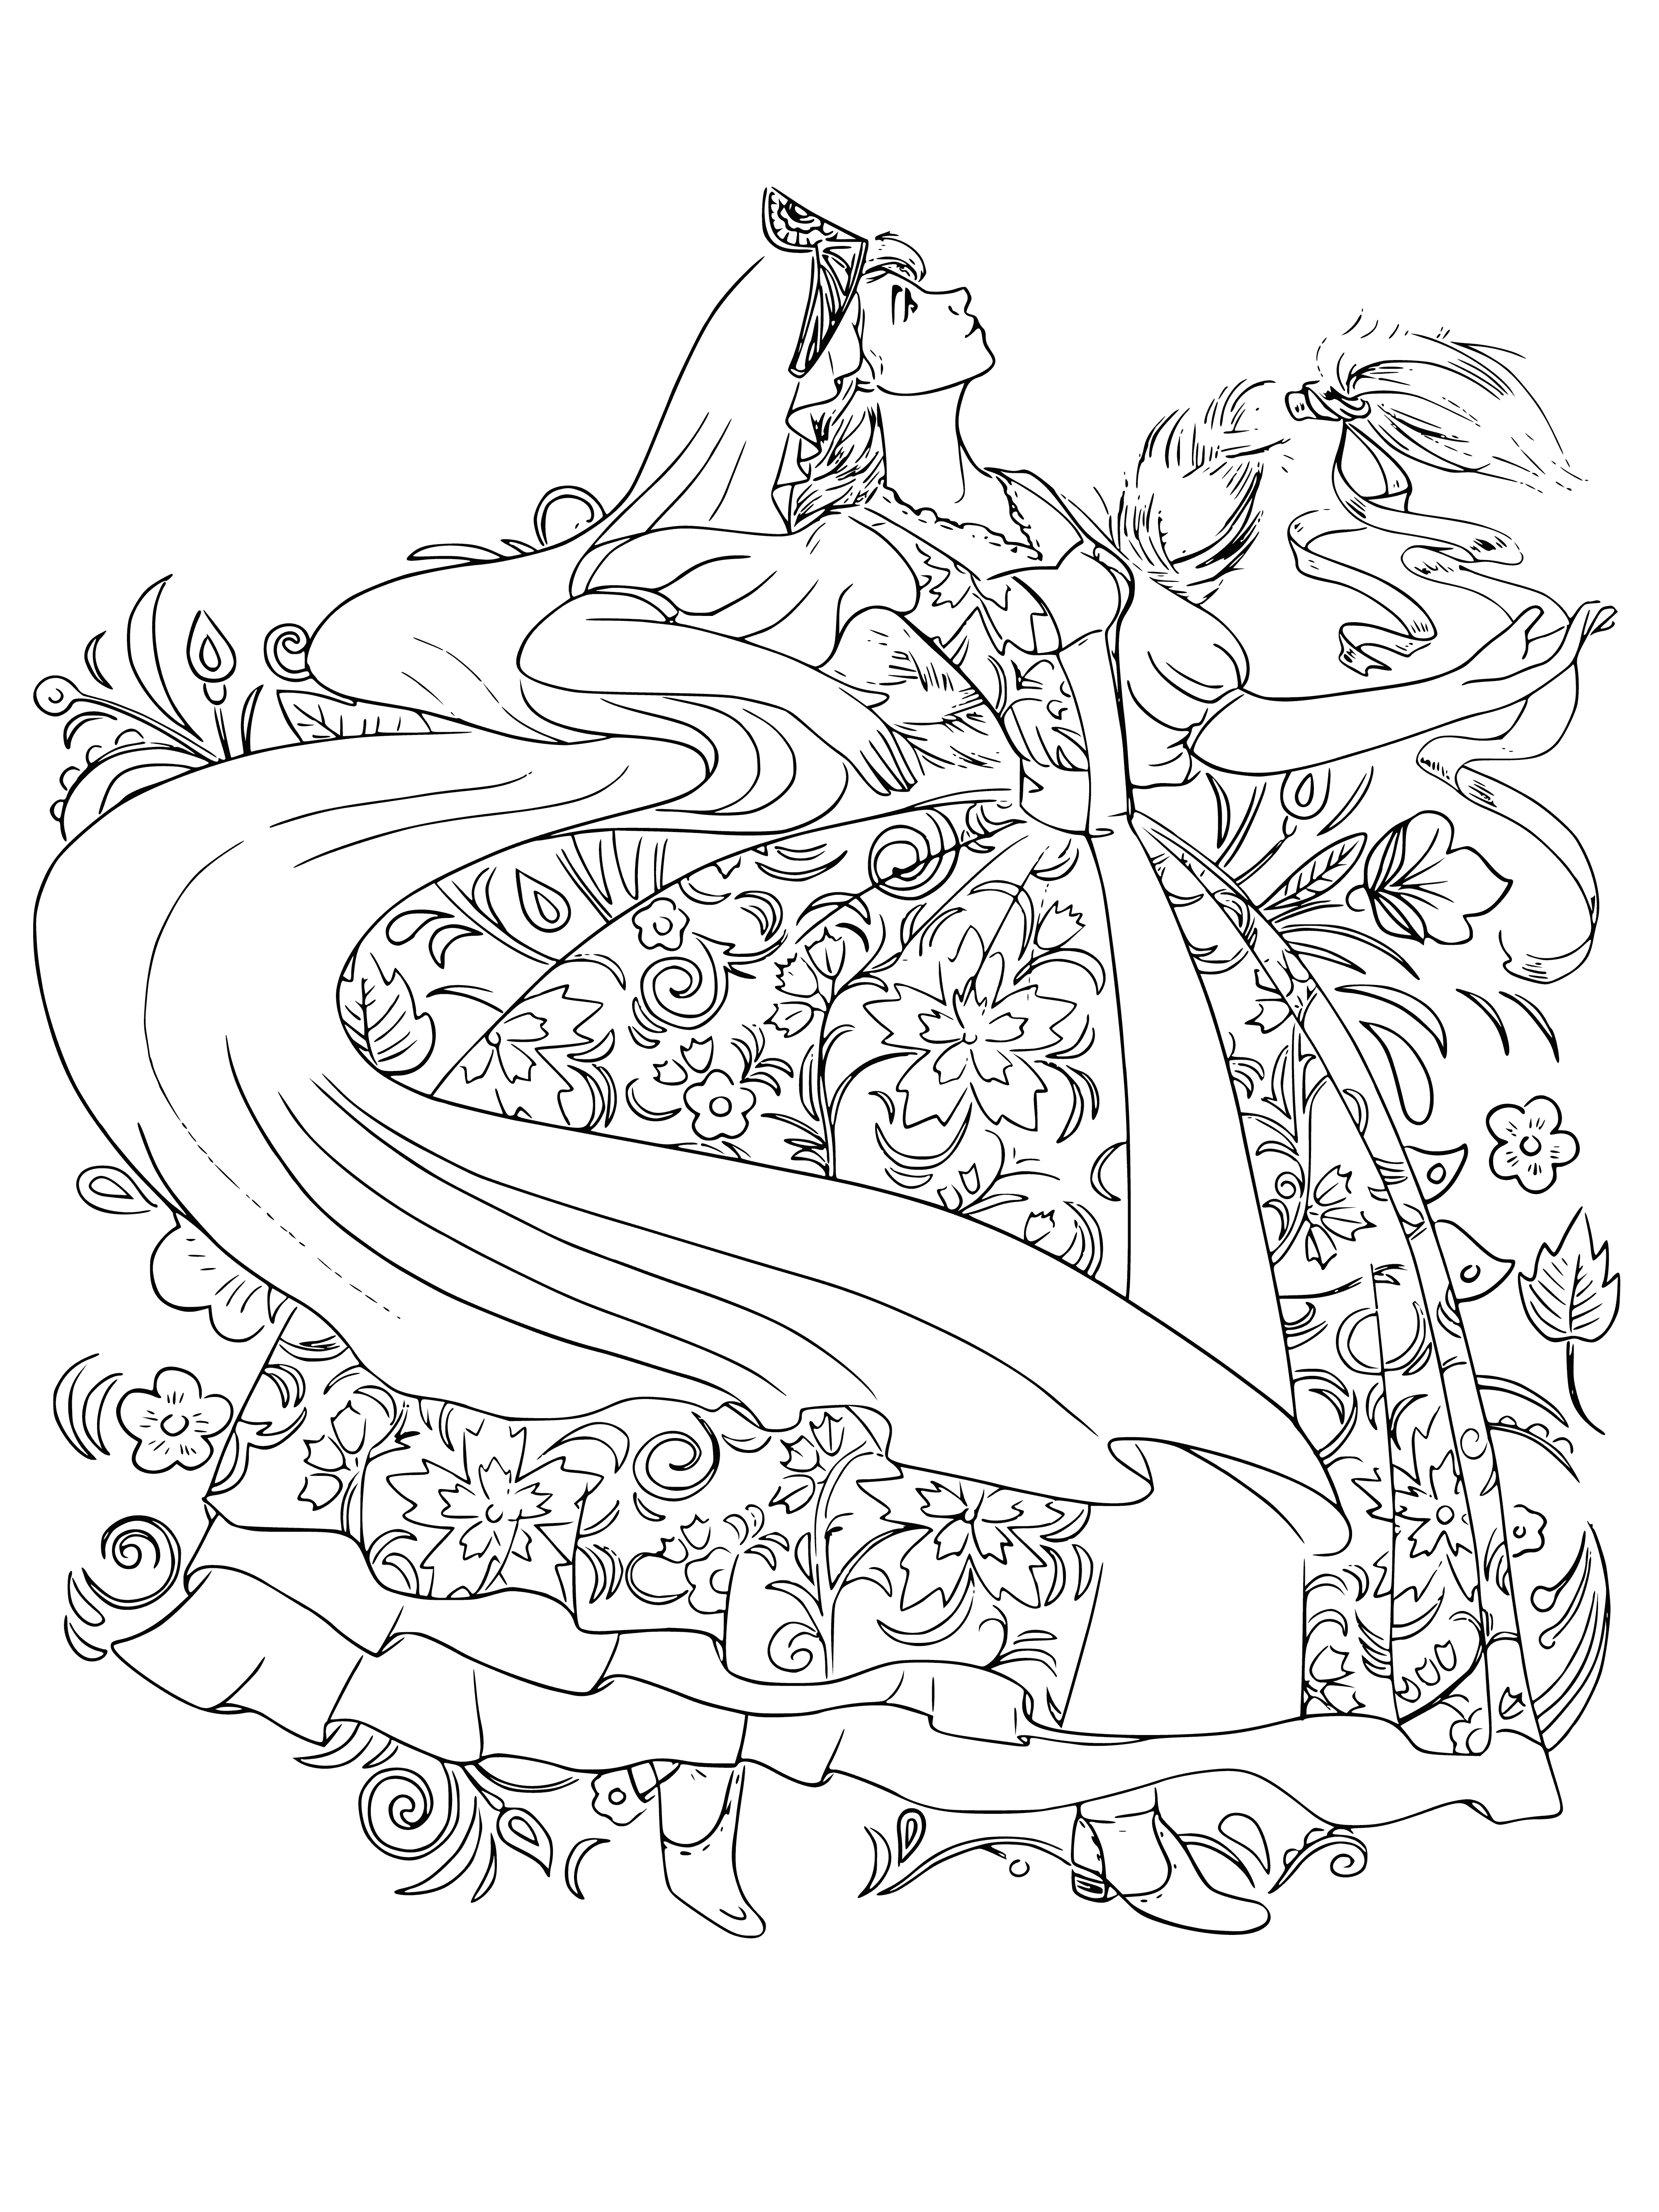 Dance coloring page